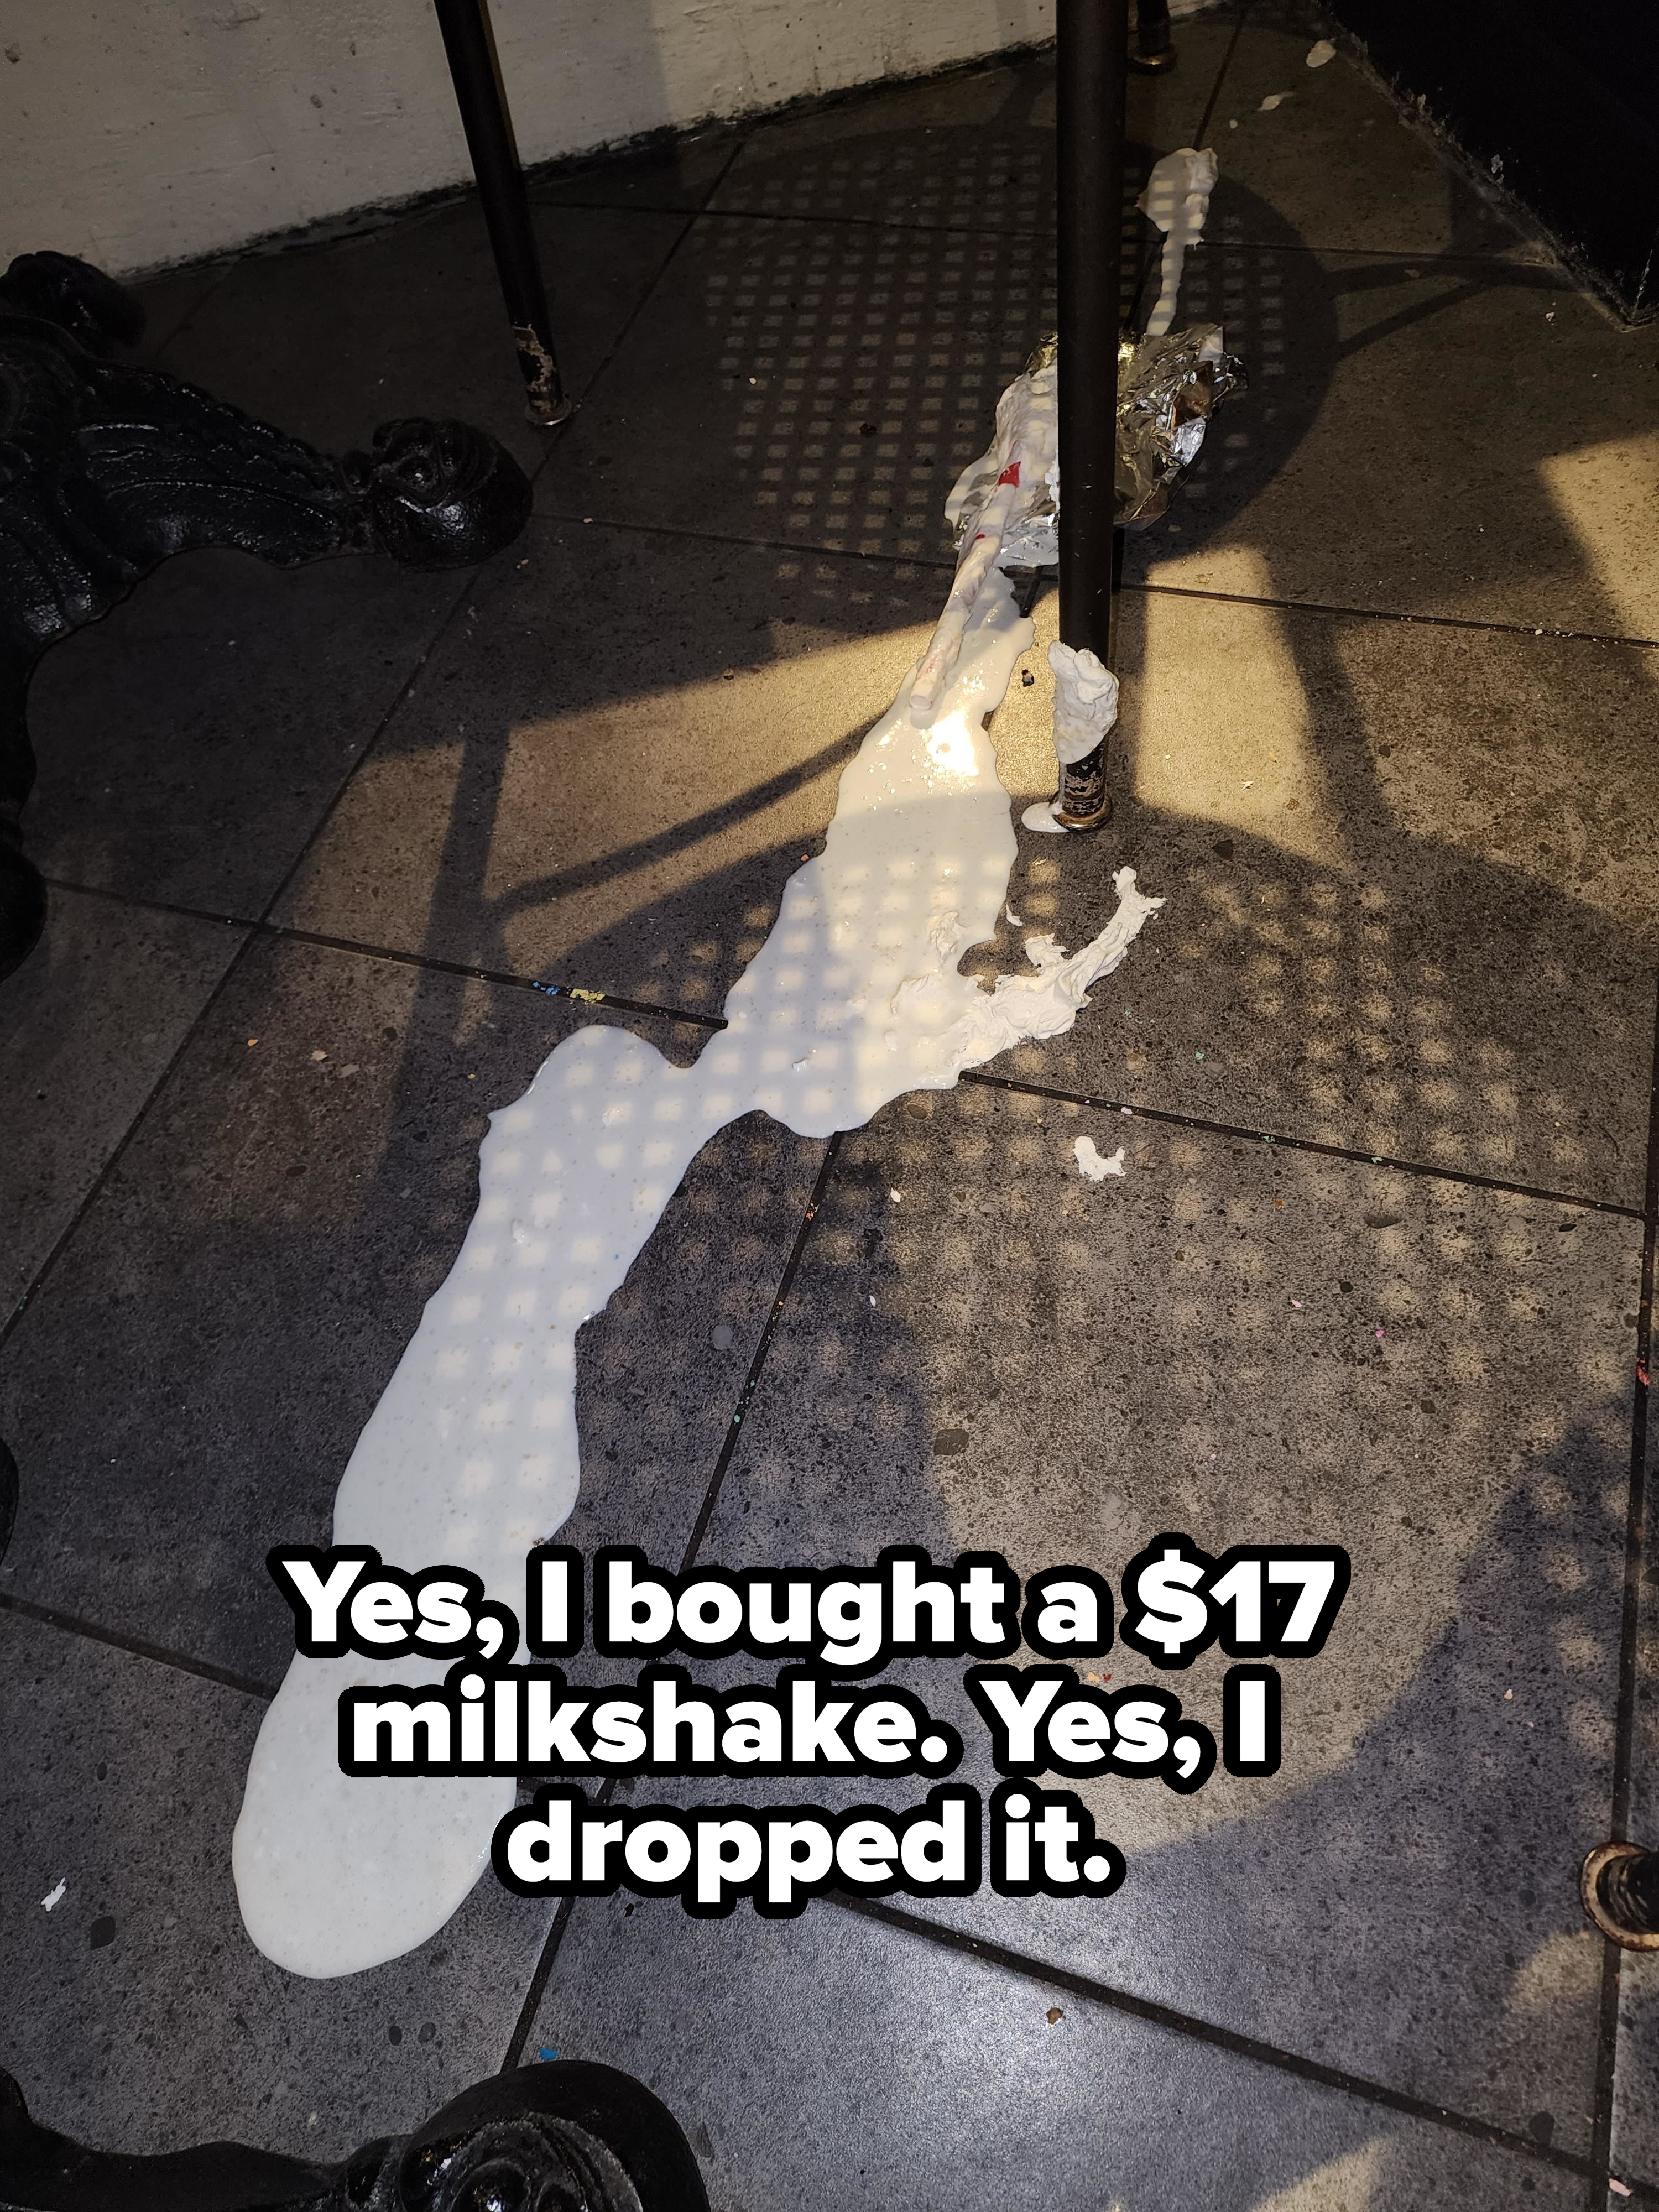 &quot;Yes, I bought a $17 milkshake; yes, I dropped it,&quot; showing spilled white liquid all over the floor